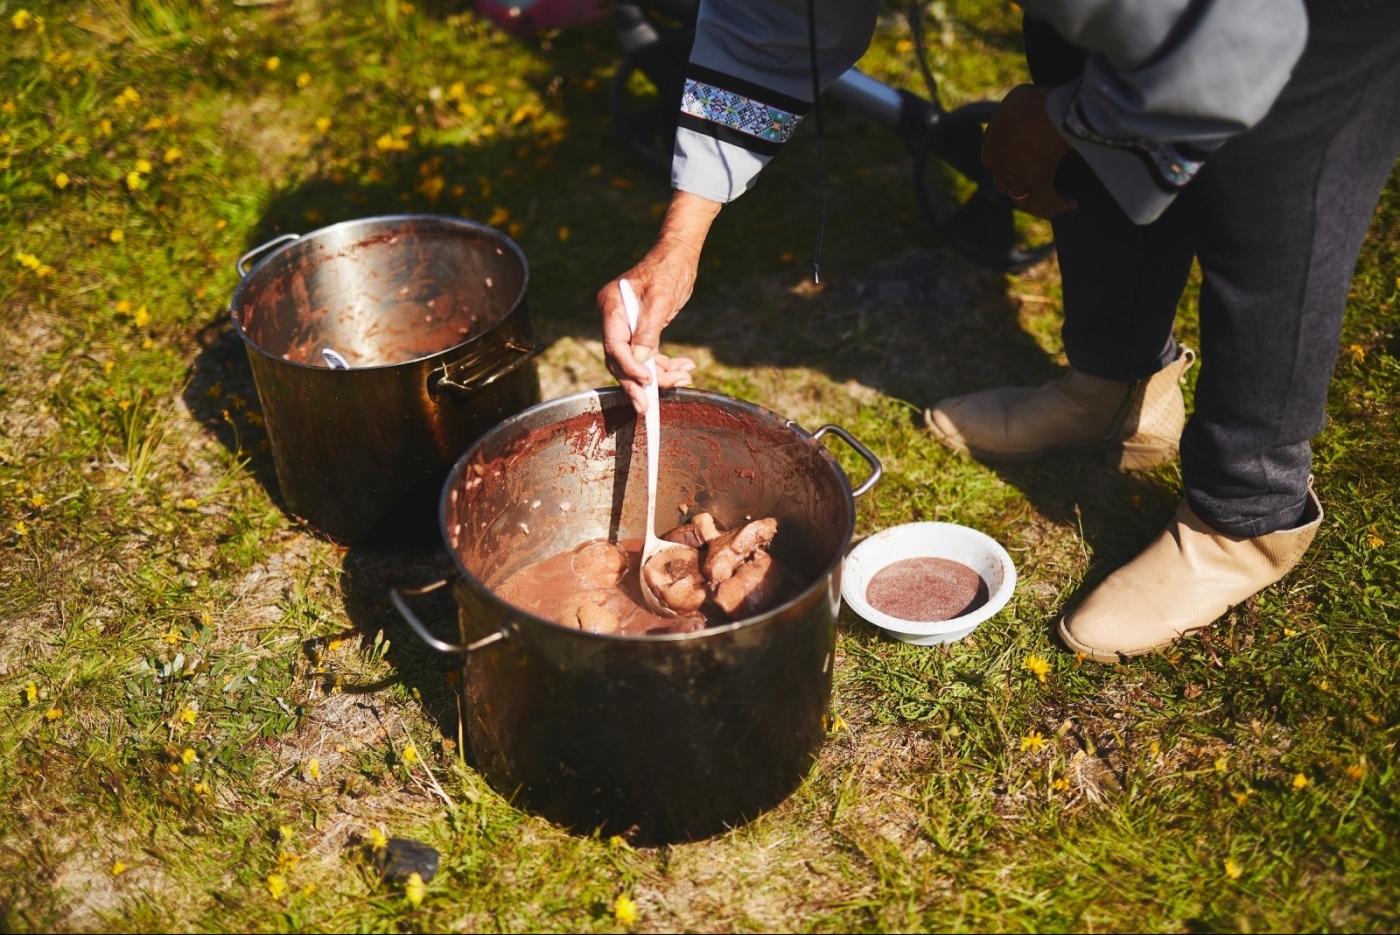 Seal soup served outside in Narsaq. Photo by Peter Lindstrom - Visit Greenland